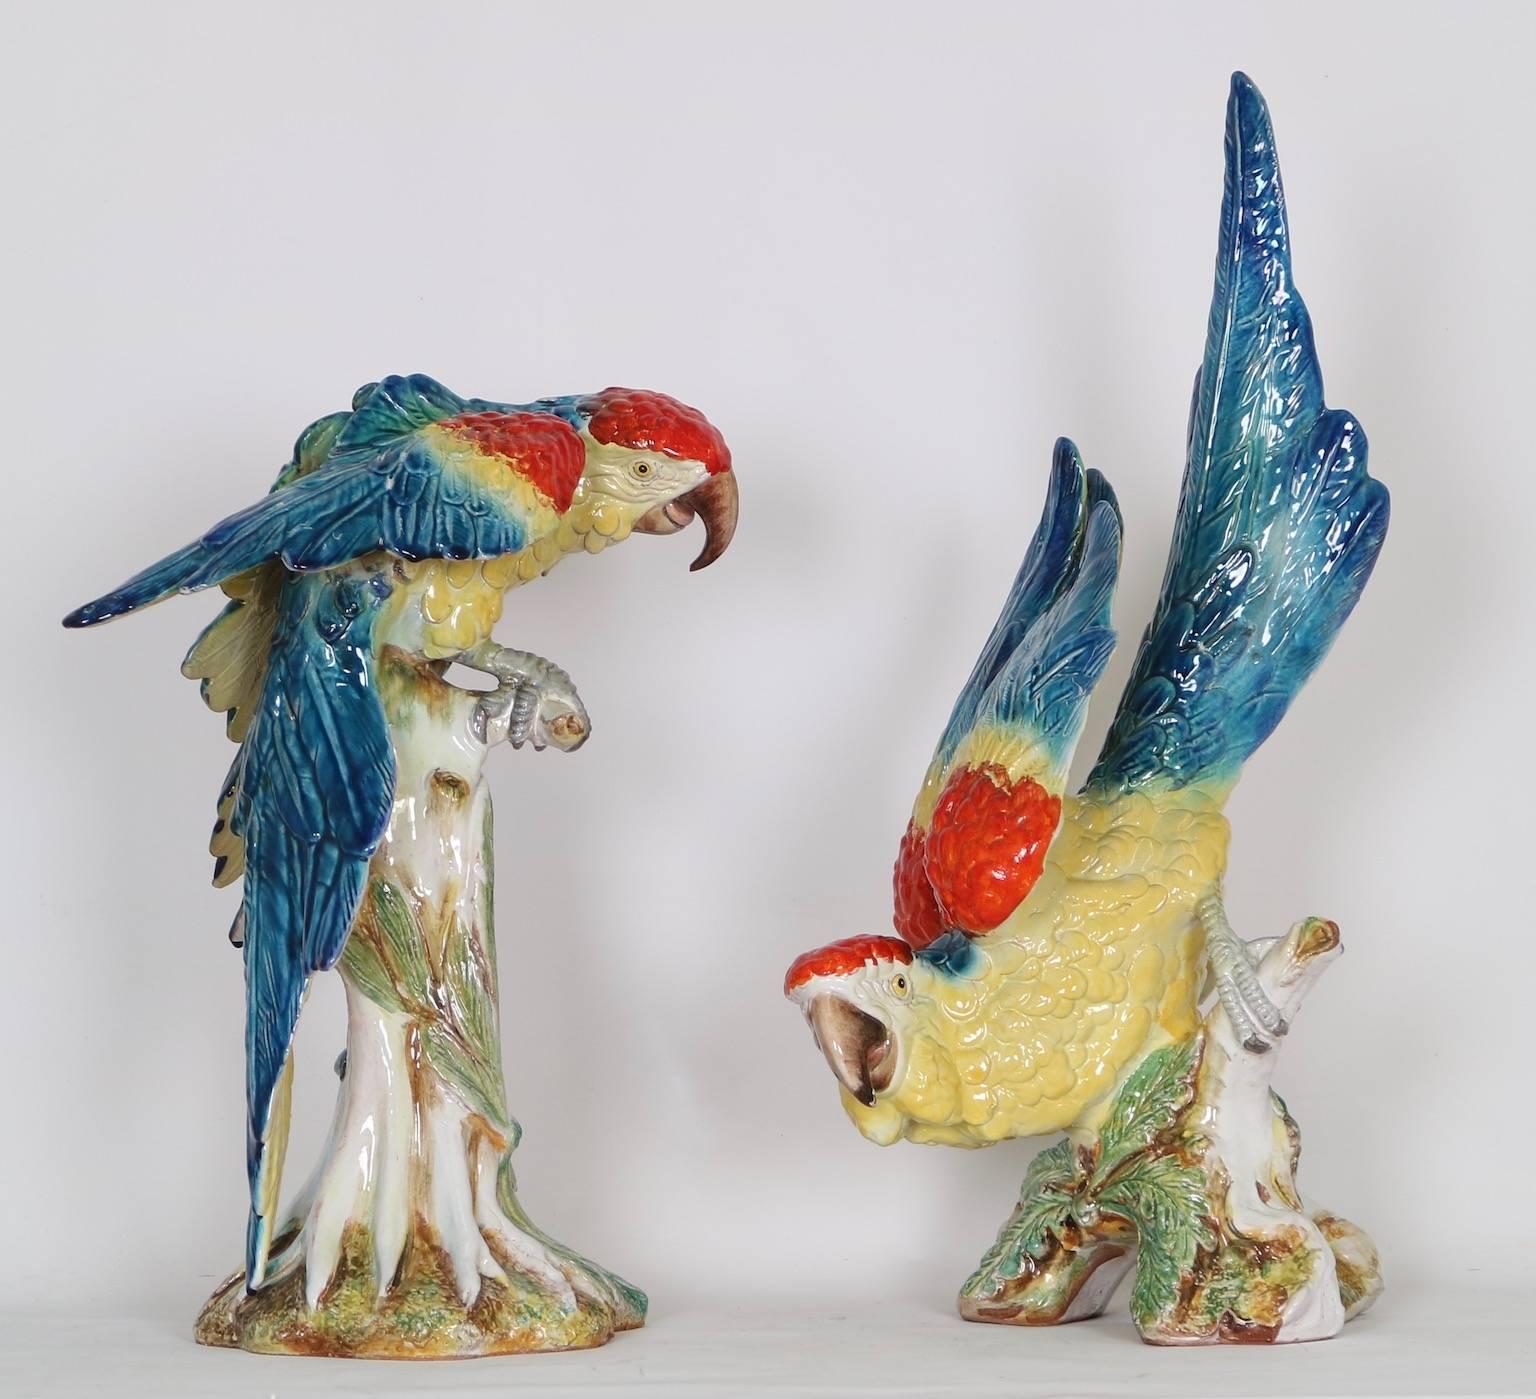 Mid-Century Modern pair of life-size macaw parrots in Italian Majolica. The parrots are painted in vivid blue, red and yellow tones. Signed by the artist- L. Landi (pictured). This pair is in excellent vintage condition and has wear consistent with